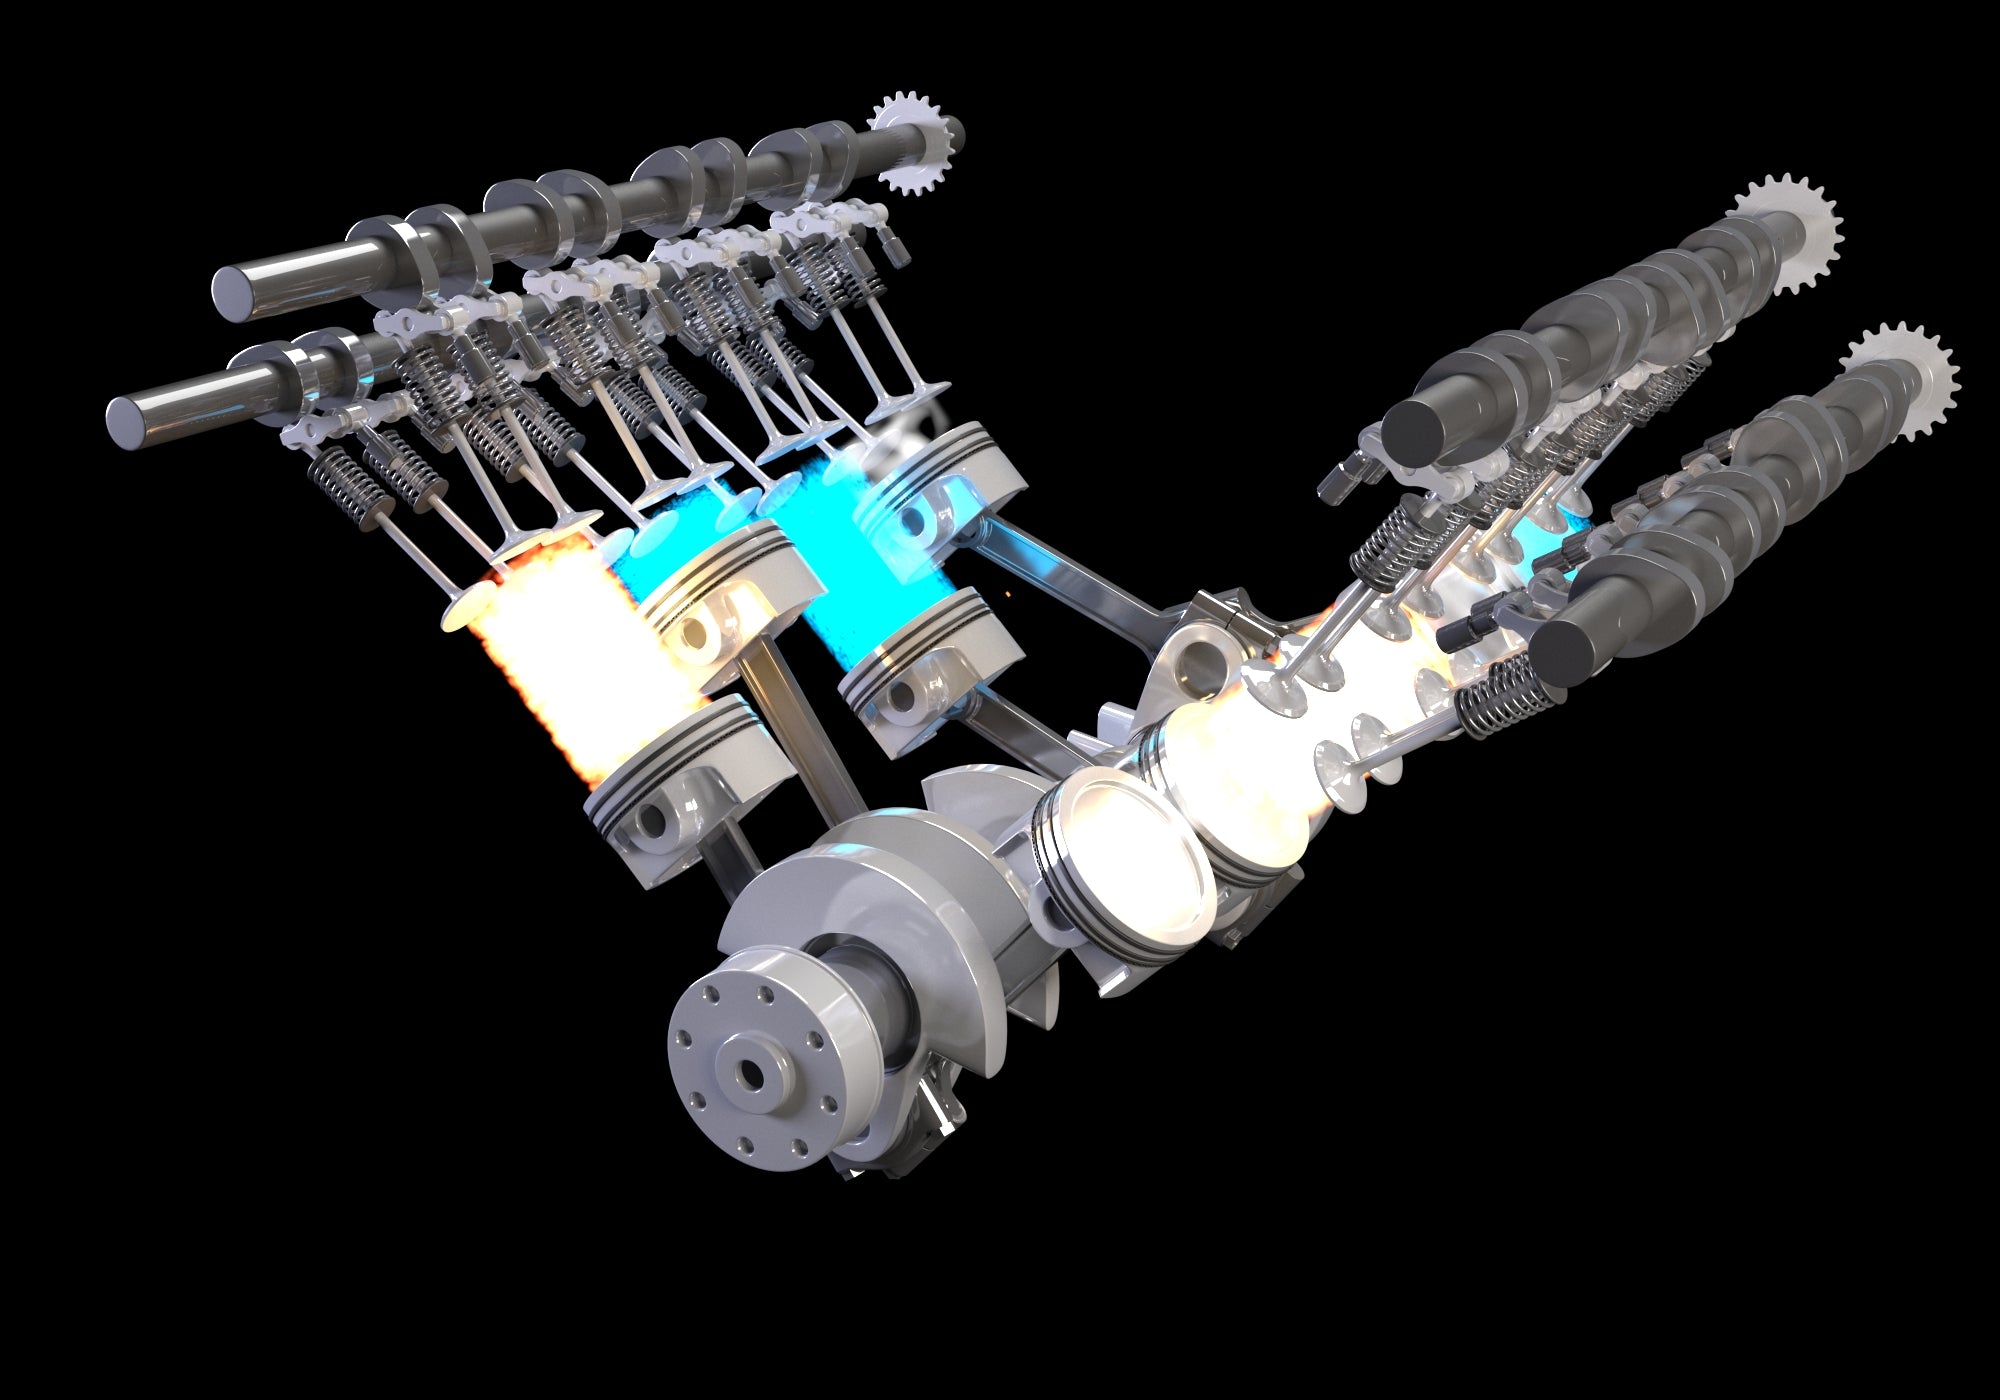 Animated Engine with Gasoline Ignition